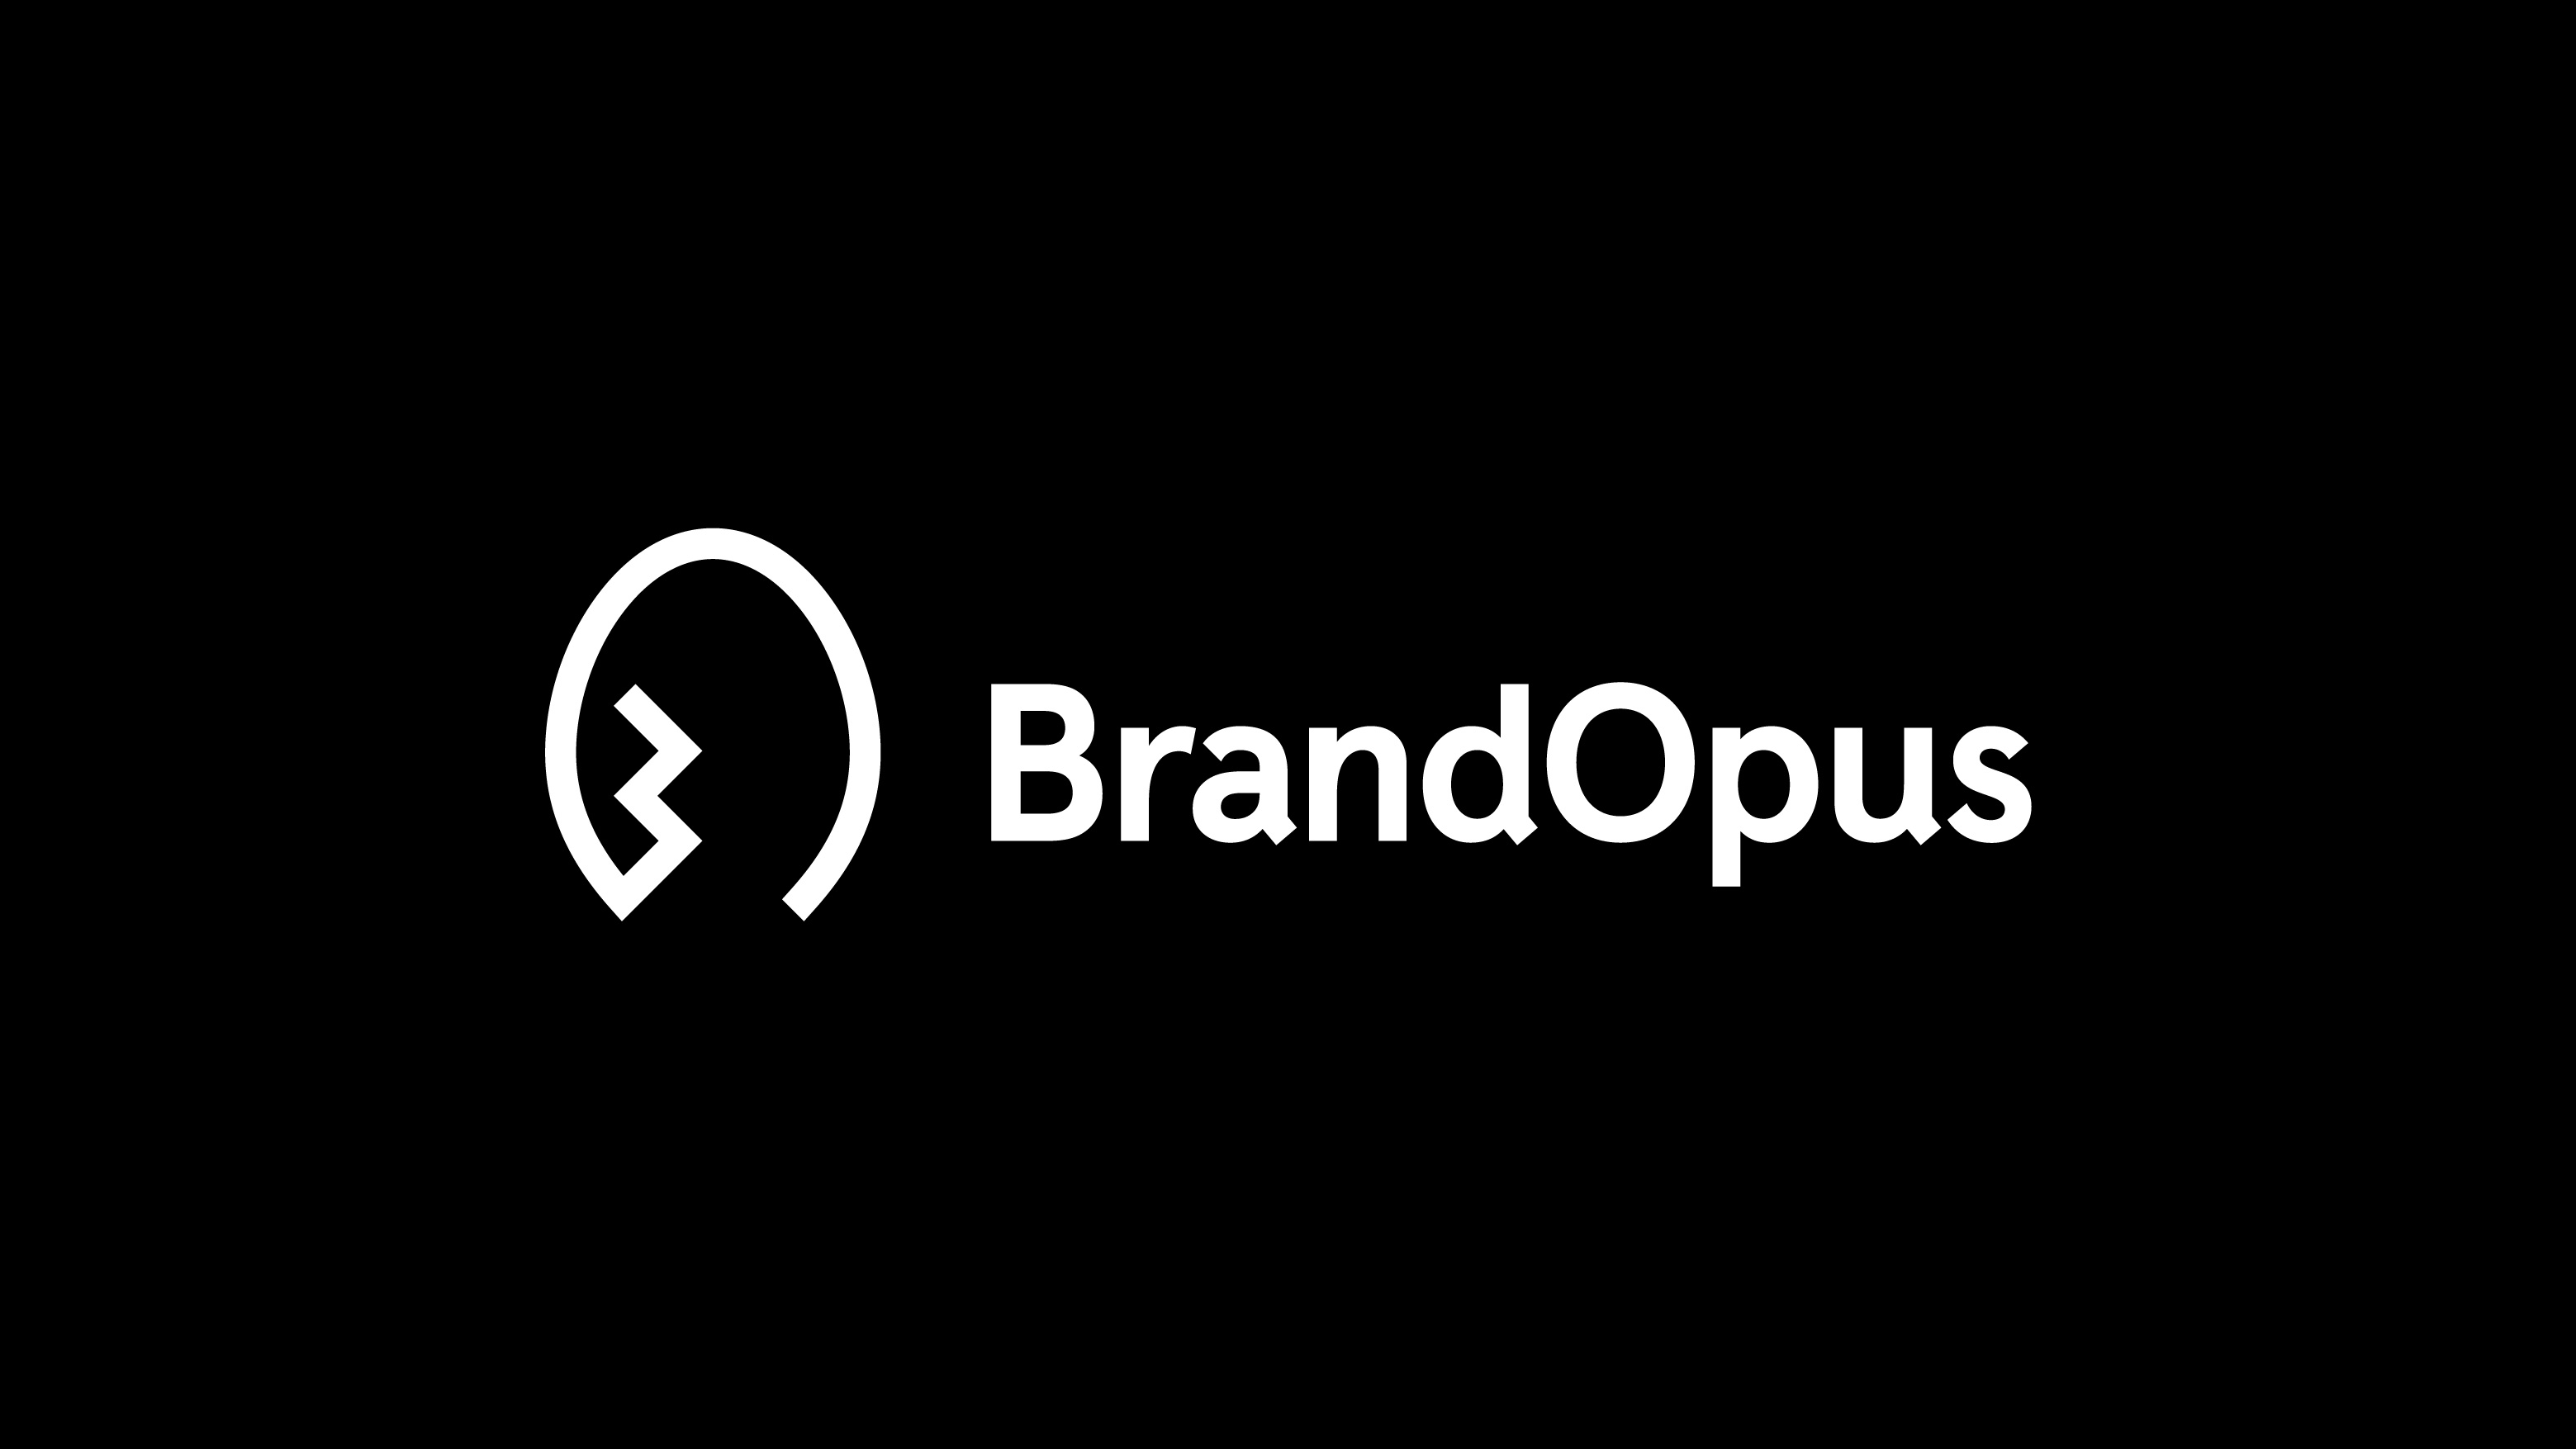 BrandOpus Heroes its People and Unique Brand of Creativity with Identity Overhaul